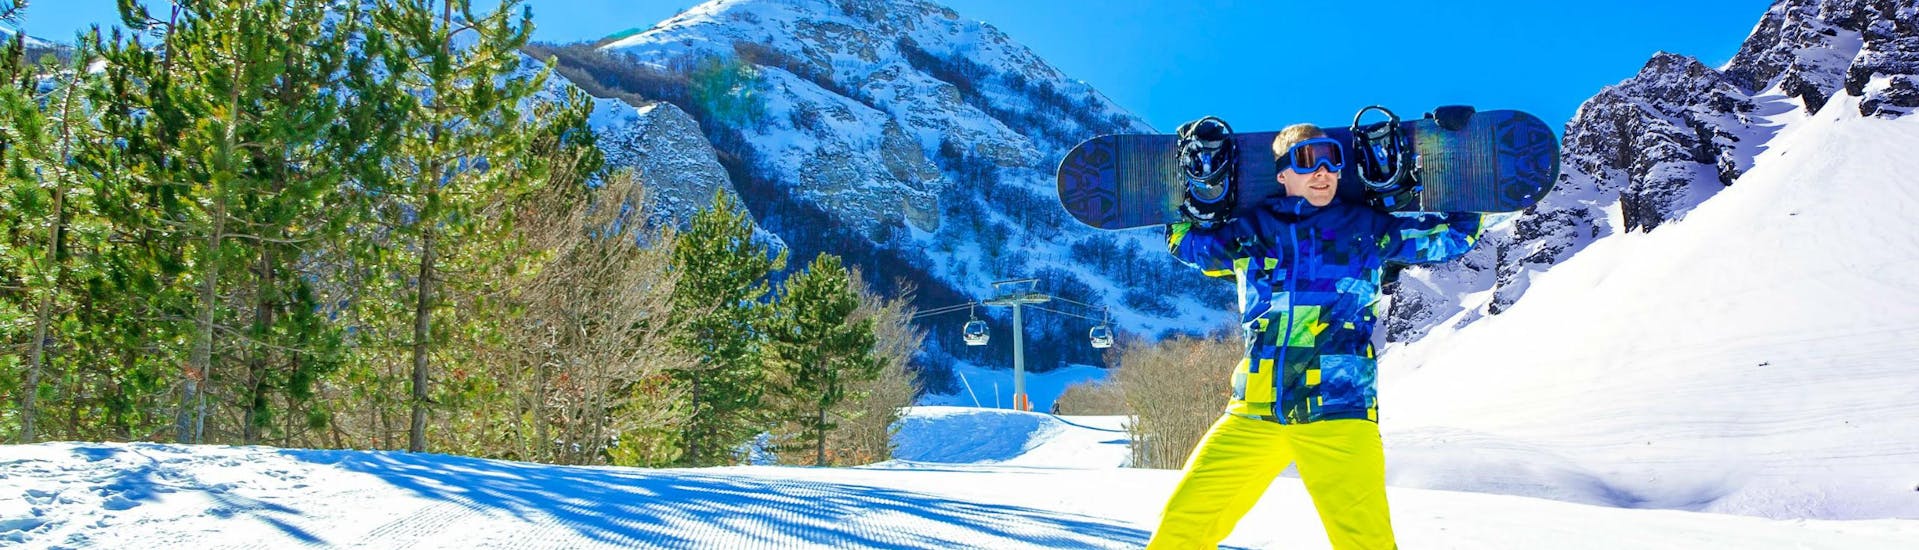 A snowboarder is posing for the camera on a sunny ski slope in the Italian region of Abruzzo, where visitors can choose from a wide range of ski lessons offered by the local ski schools.